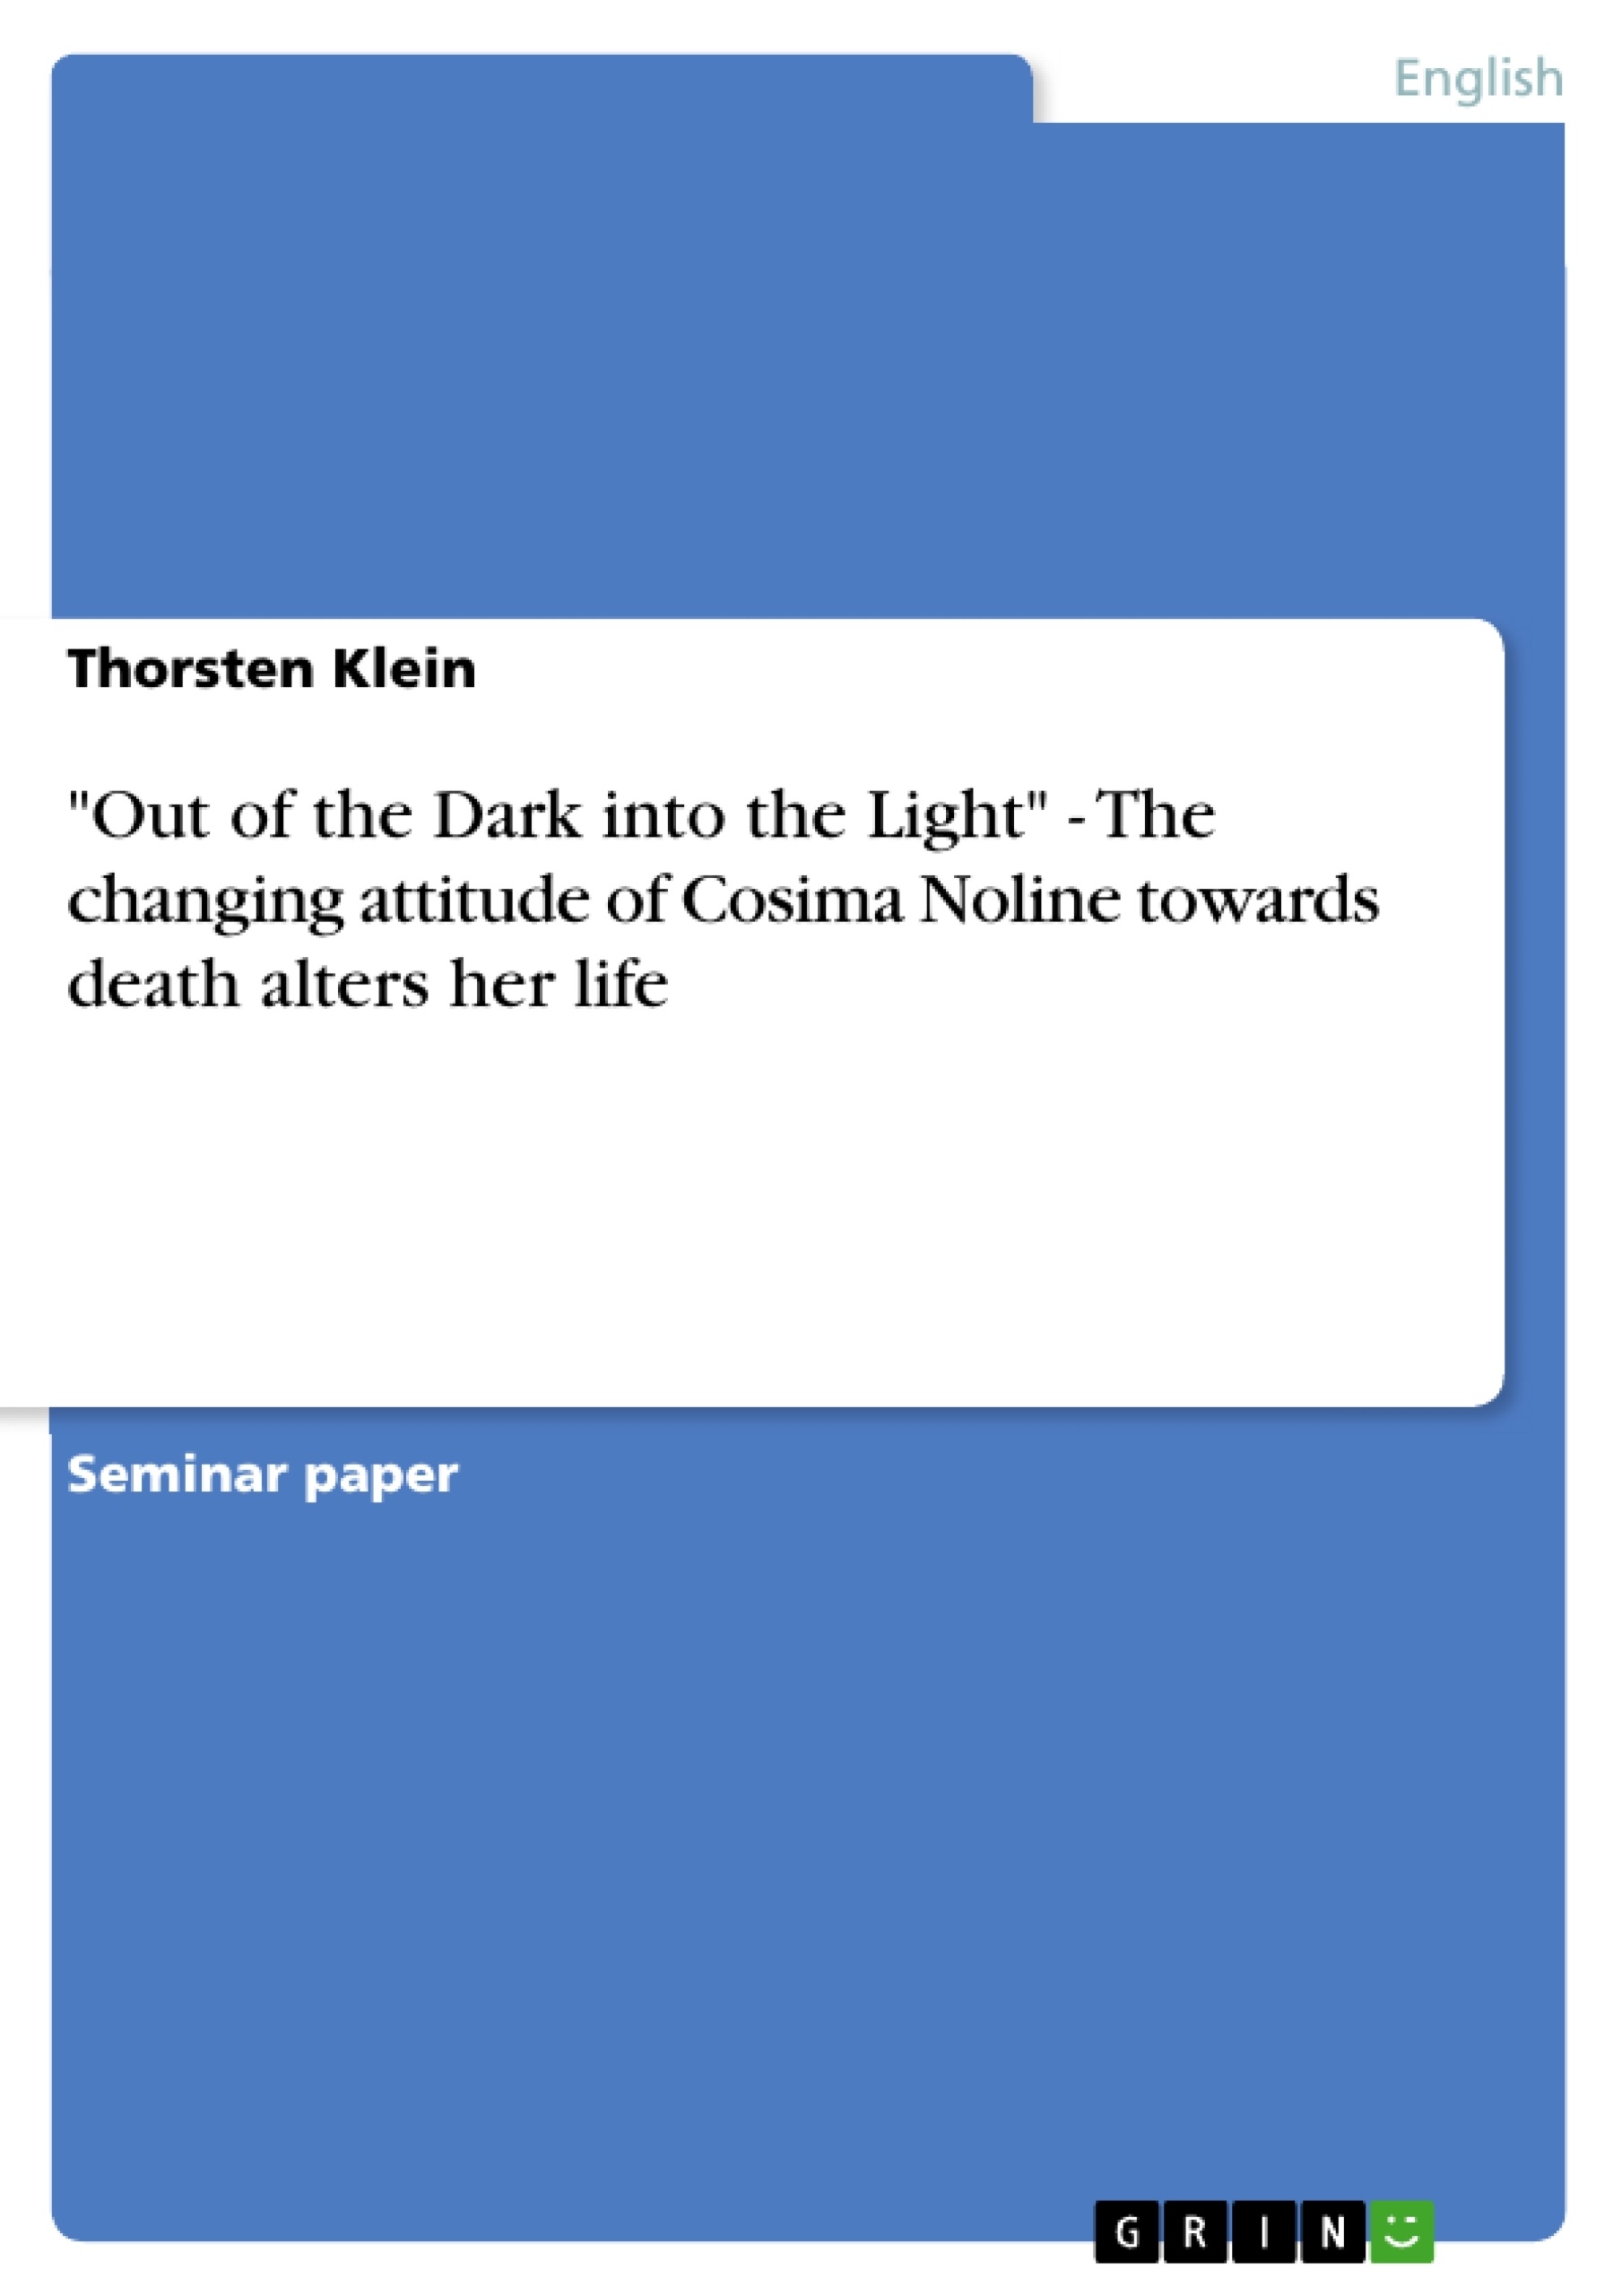 Titre: "Out of the Dark into the Light" - The changing attitude of Cosima Noline towards death alters her life